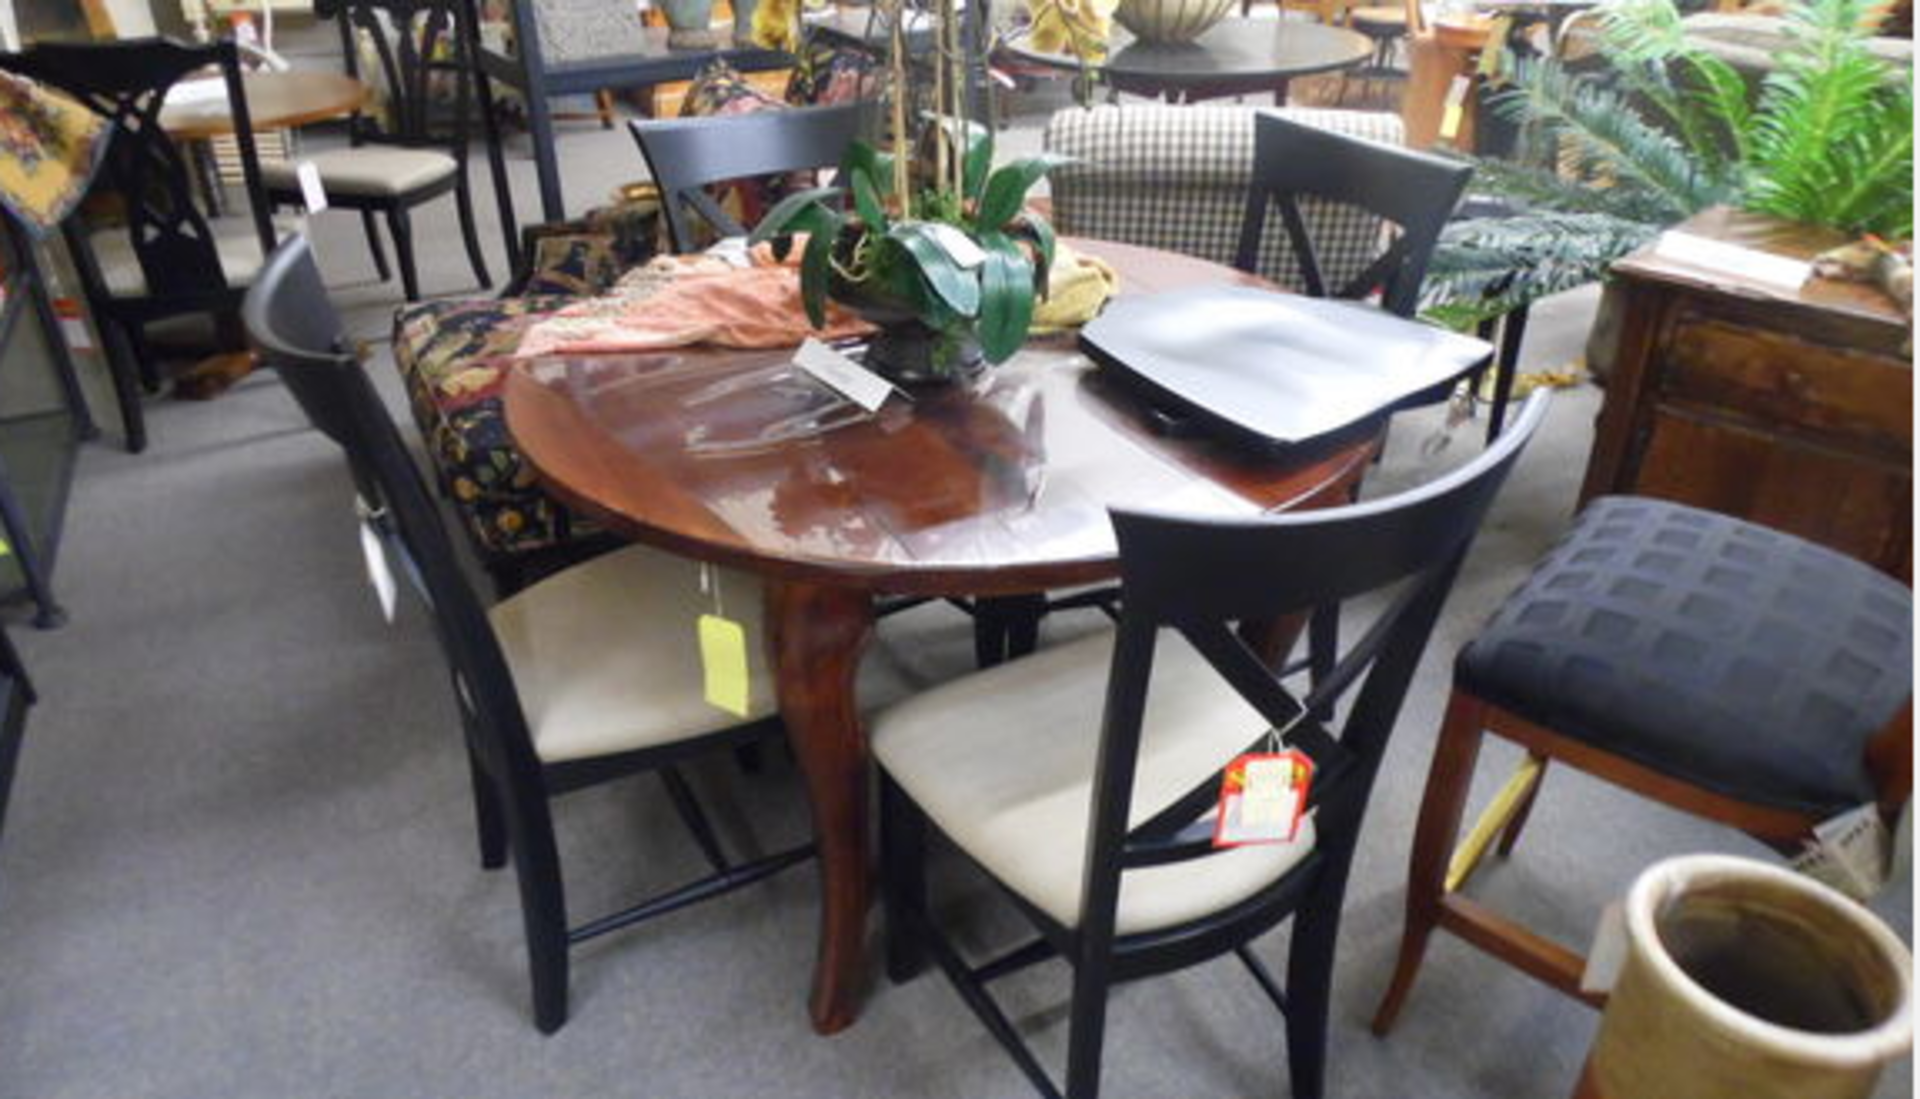 CLICK HERE FOR PREVIEW - Furniture & Decor Items Auction - Image 5 of 5